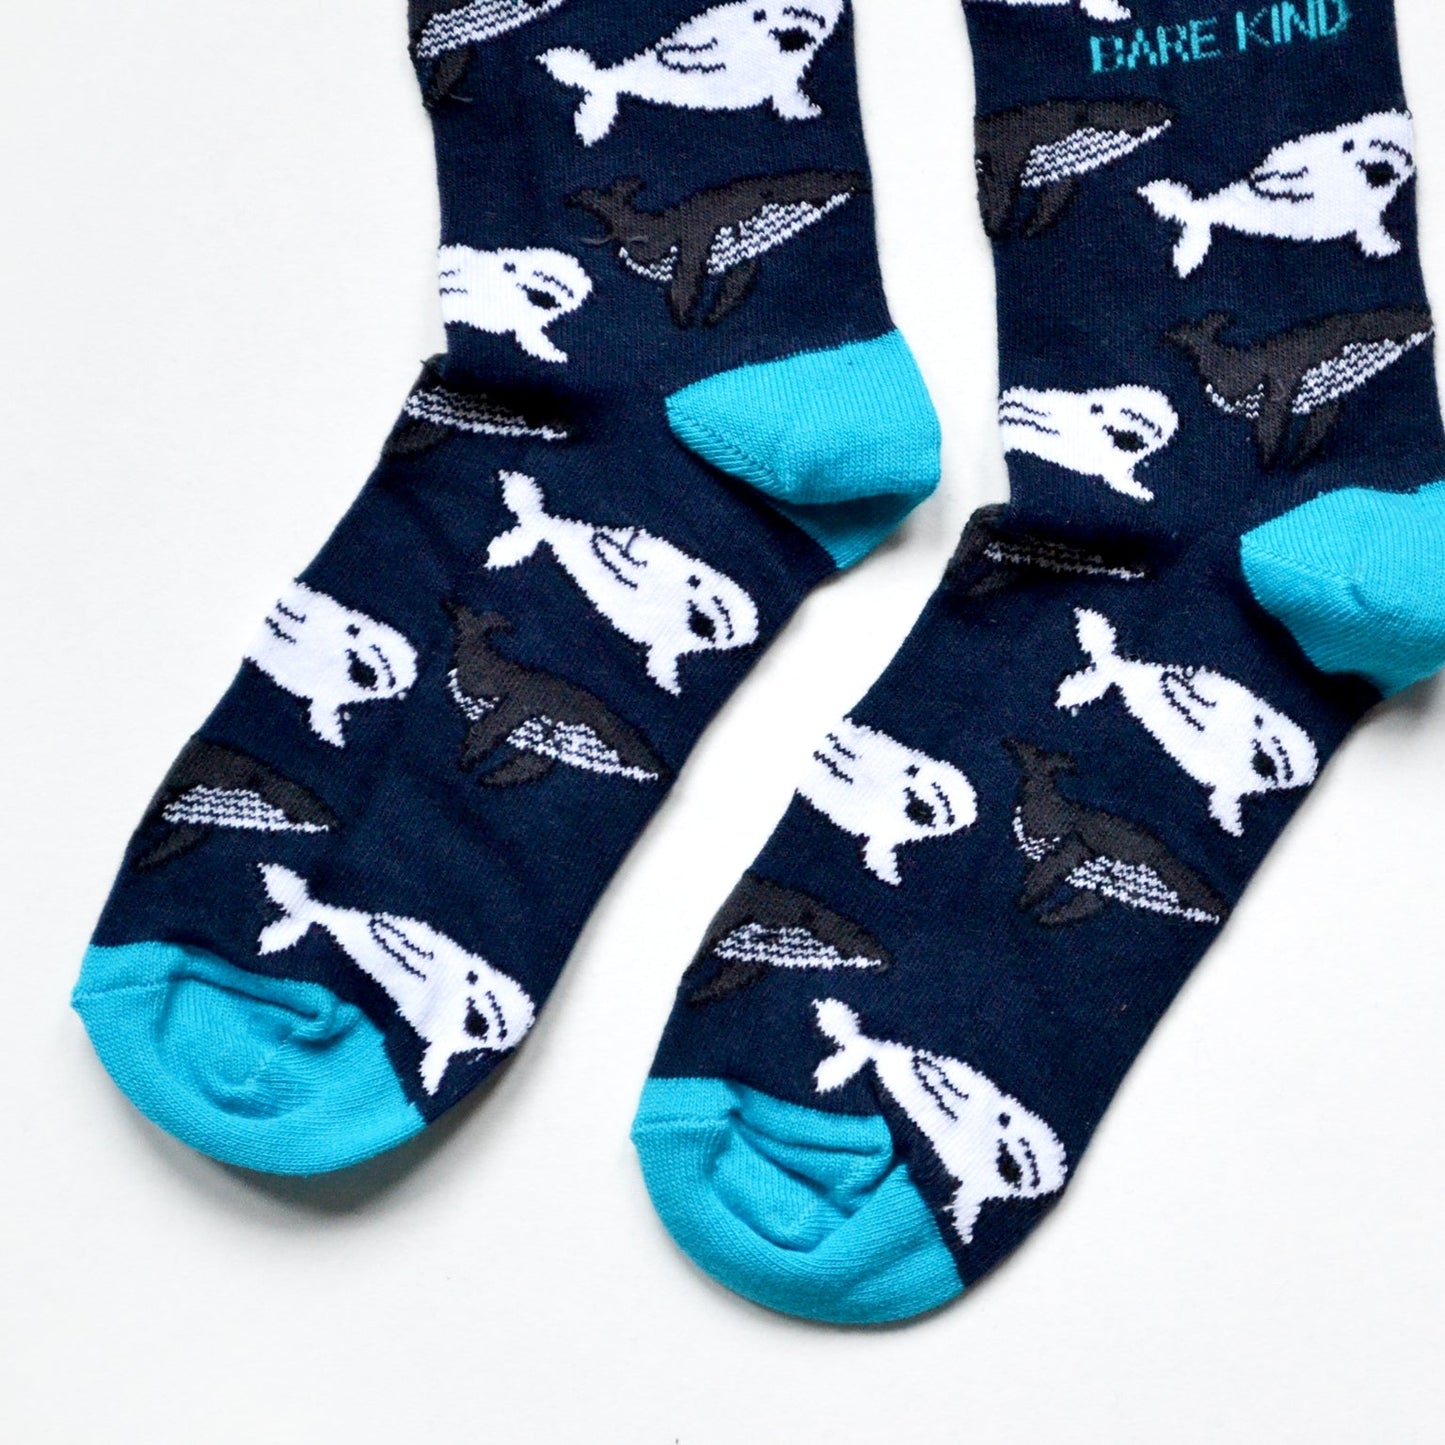 Bare Kind Bamboo Socks - Save the Whales